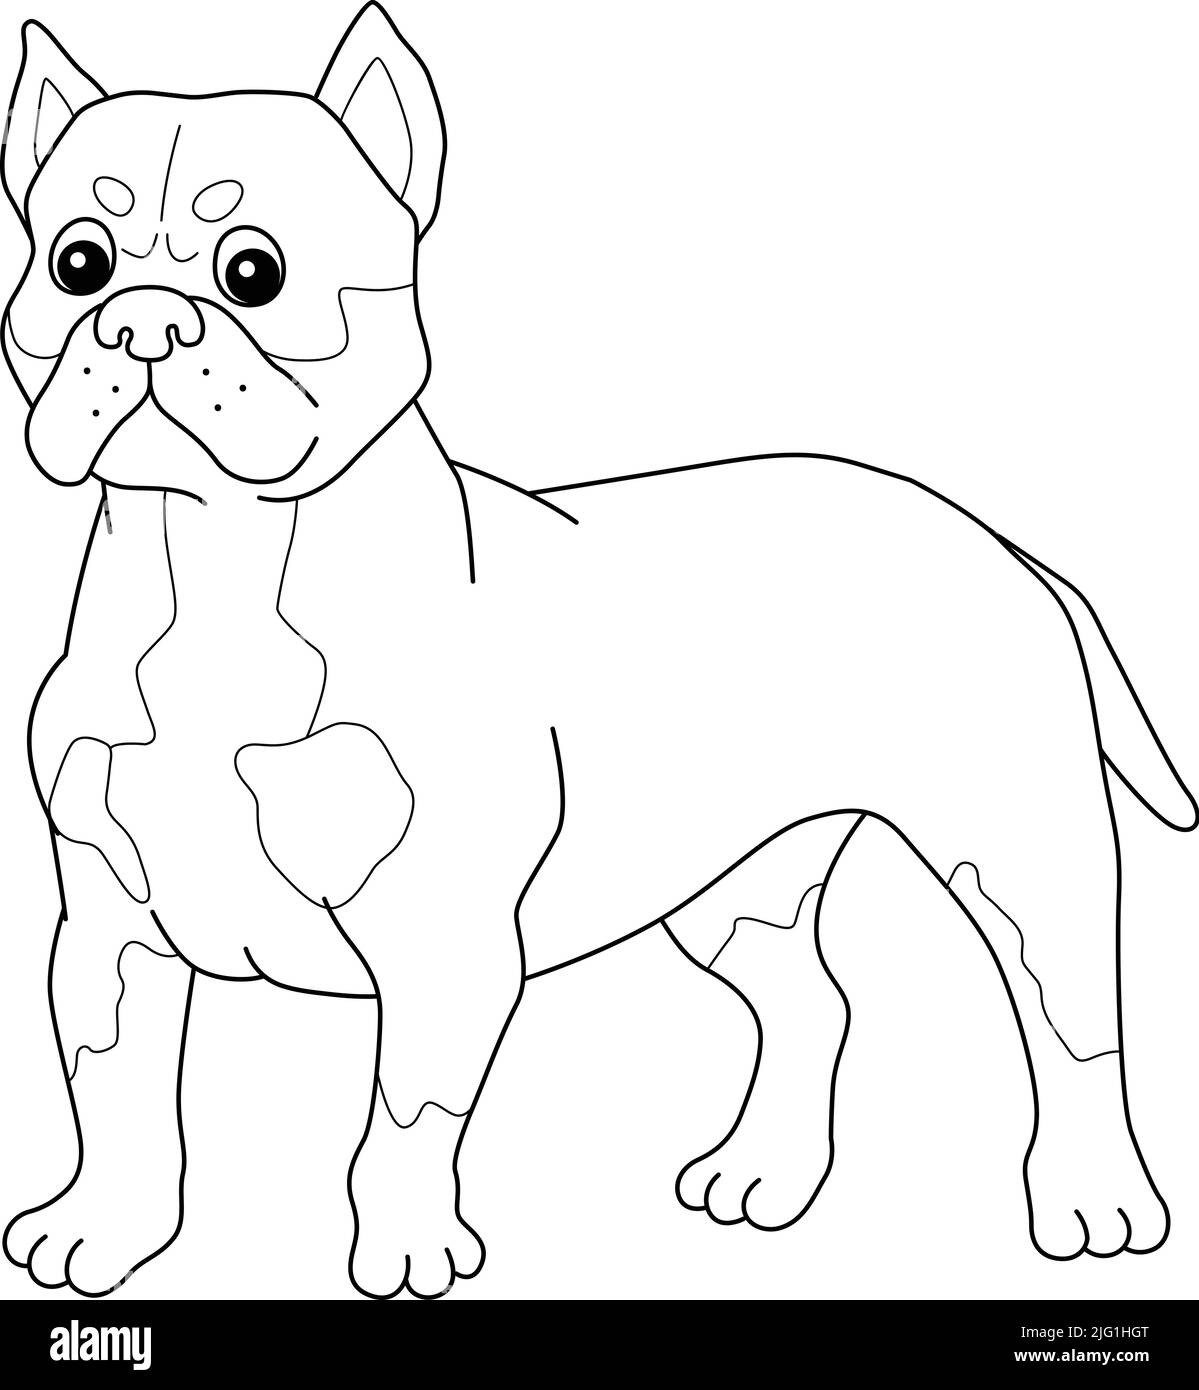 Image Details INH3783126159  Continuous line drawing illustration head  of a bully dog breed such as American Pit Bull Terrier English Bulldog  Bull Mastiff or Bull Terrier done in sketch or doodle